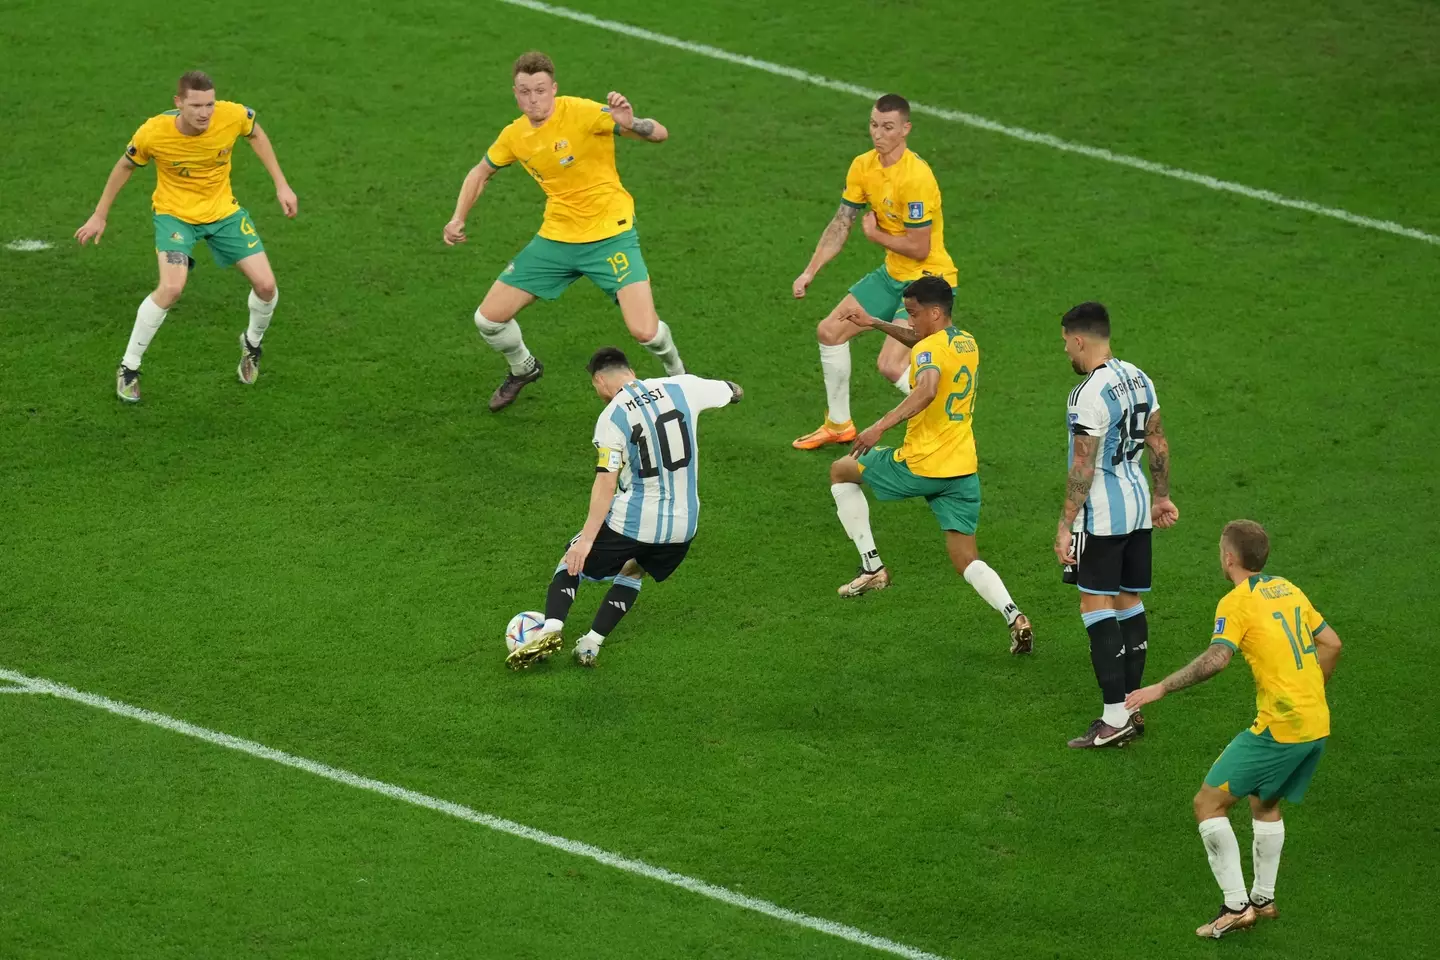 Messi's finish looked effortless. (Image